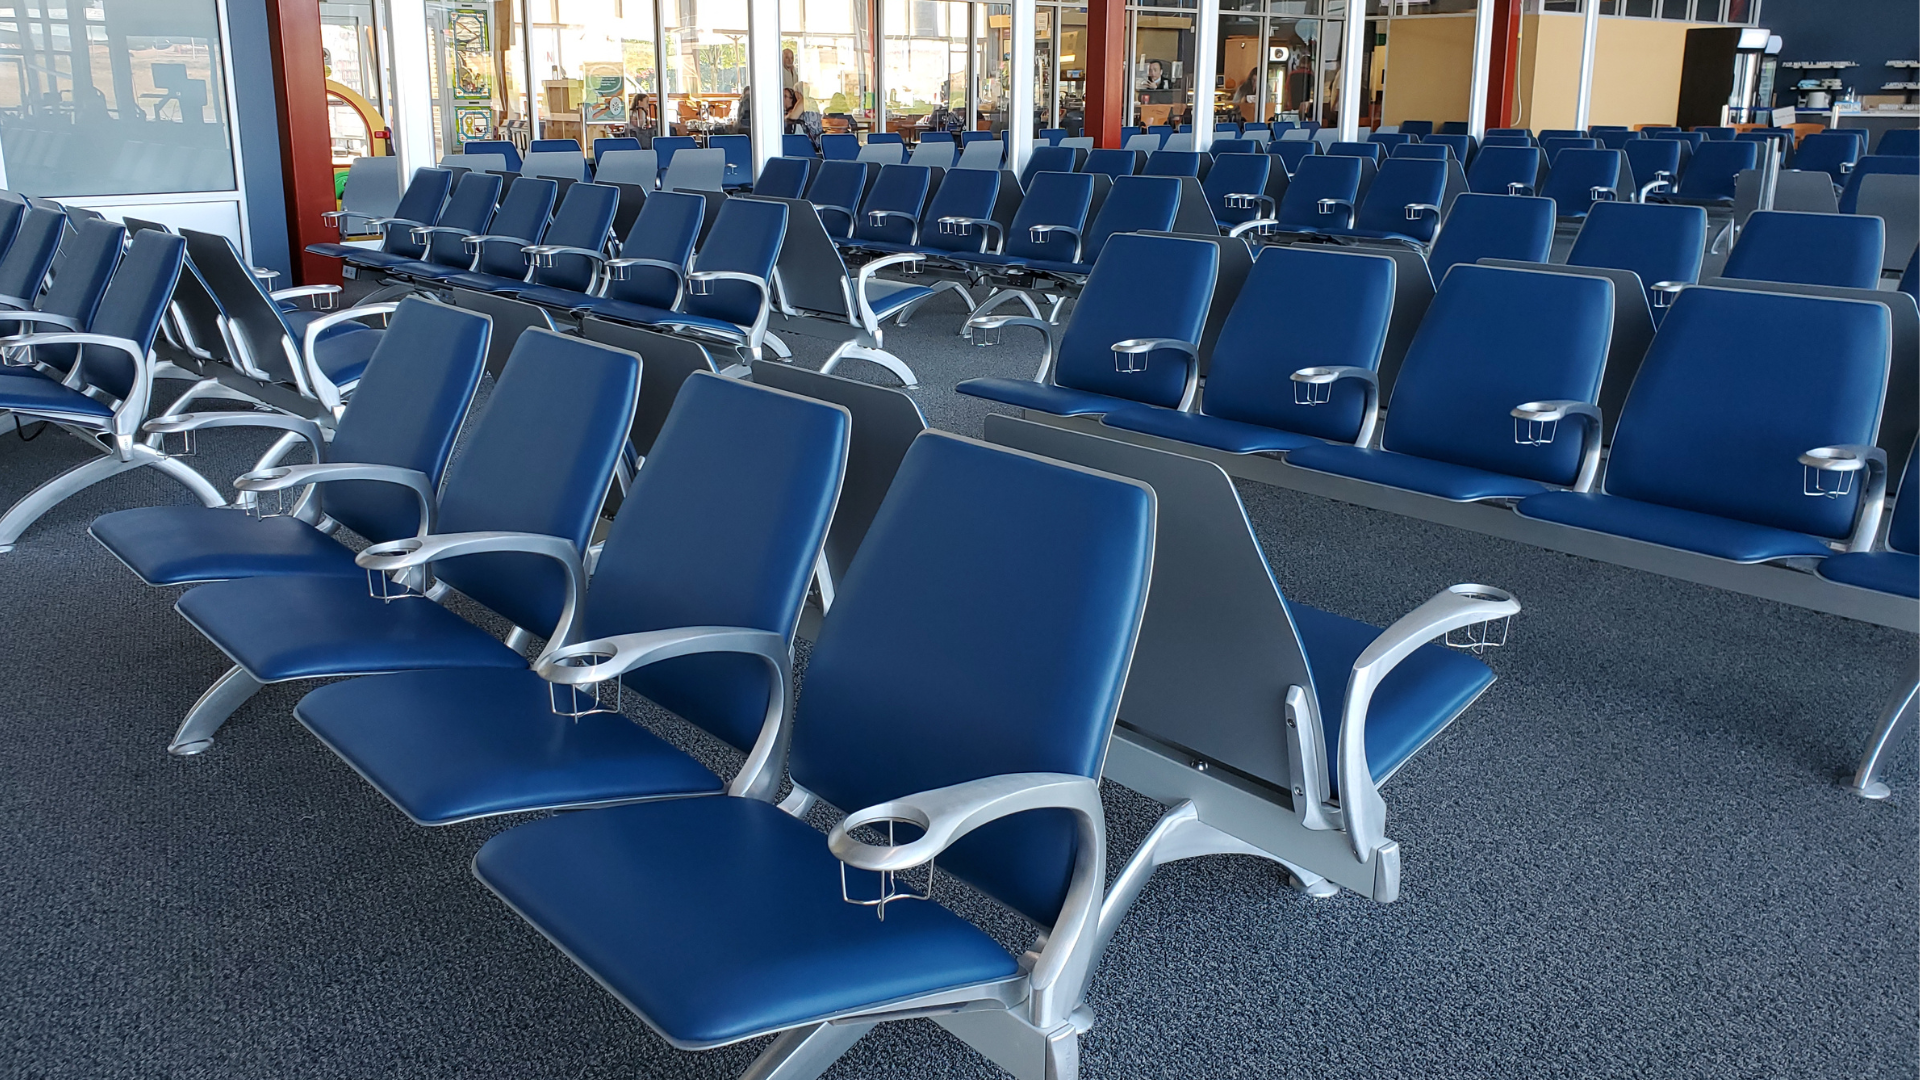 Image of Airport seating area filled with blue chairs.